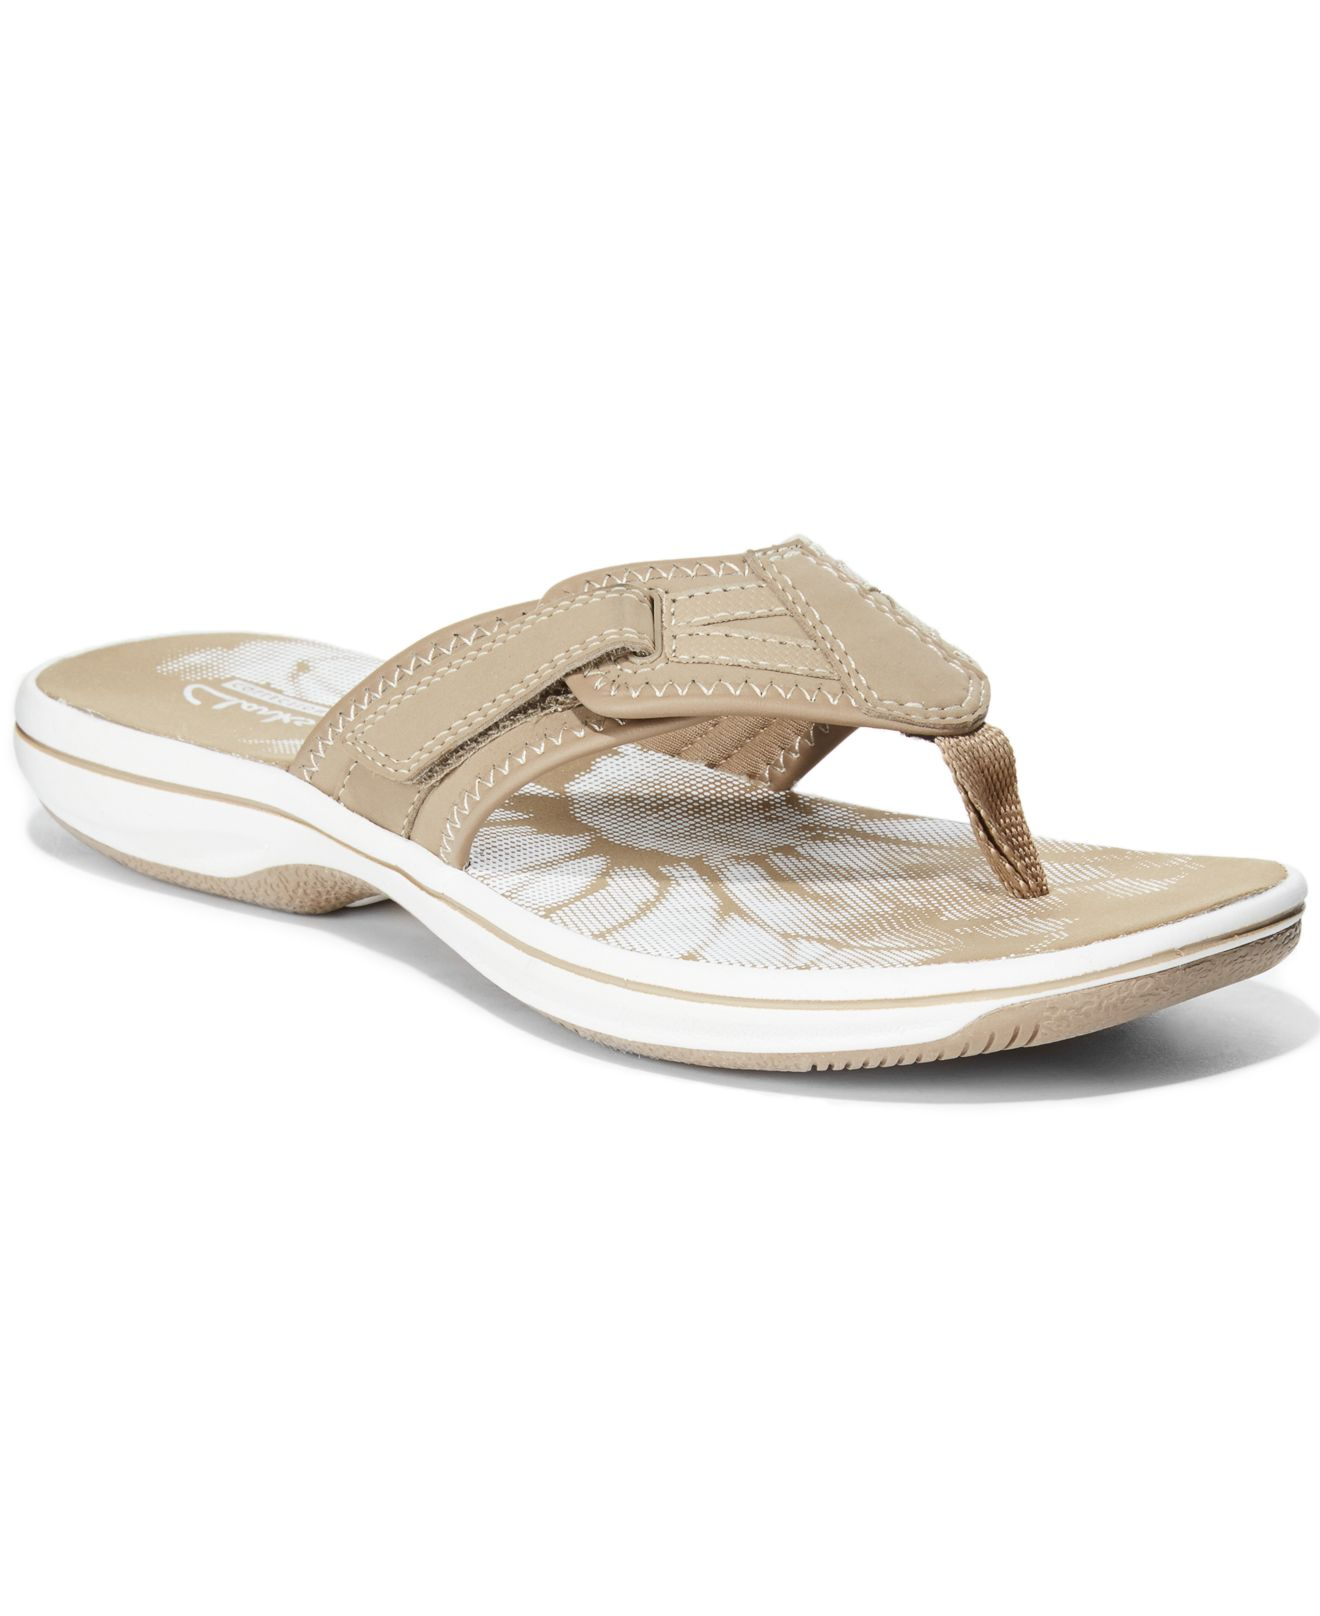 Lyst - Clarks Collection Women's Brinkley Athol Flip Flops in Gray